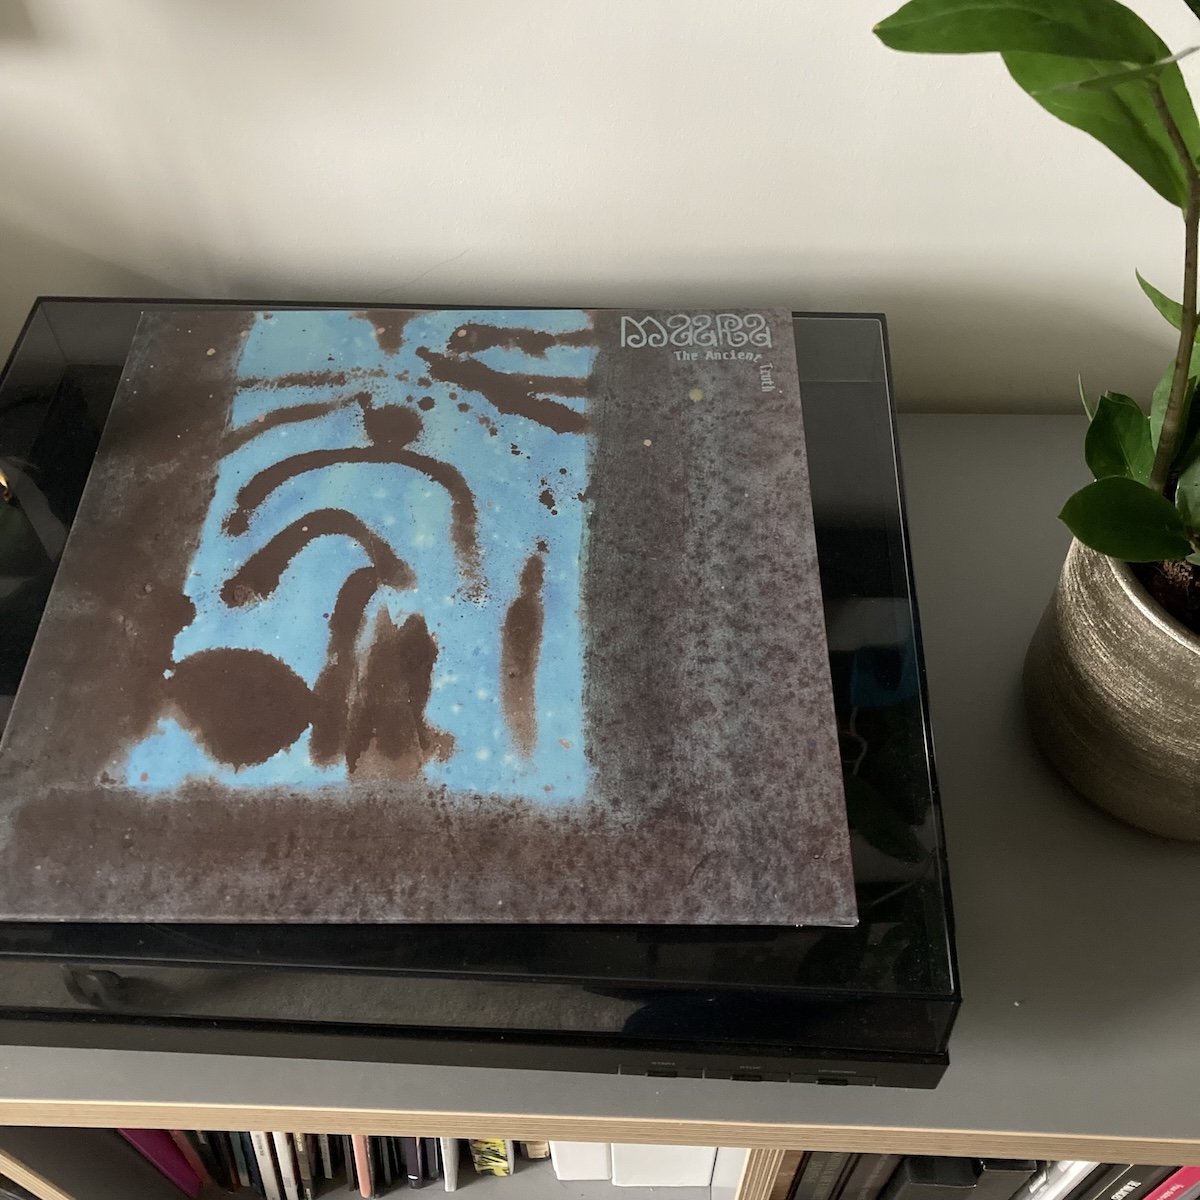 A copy of the album The Ancient Truth by Maara on top of my turntable watched over by pot plants.